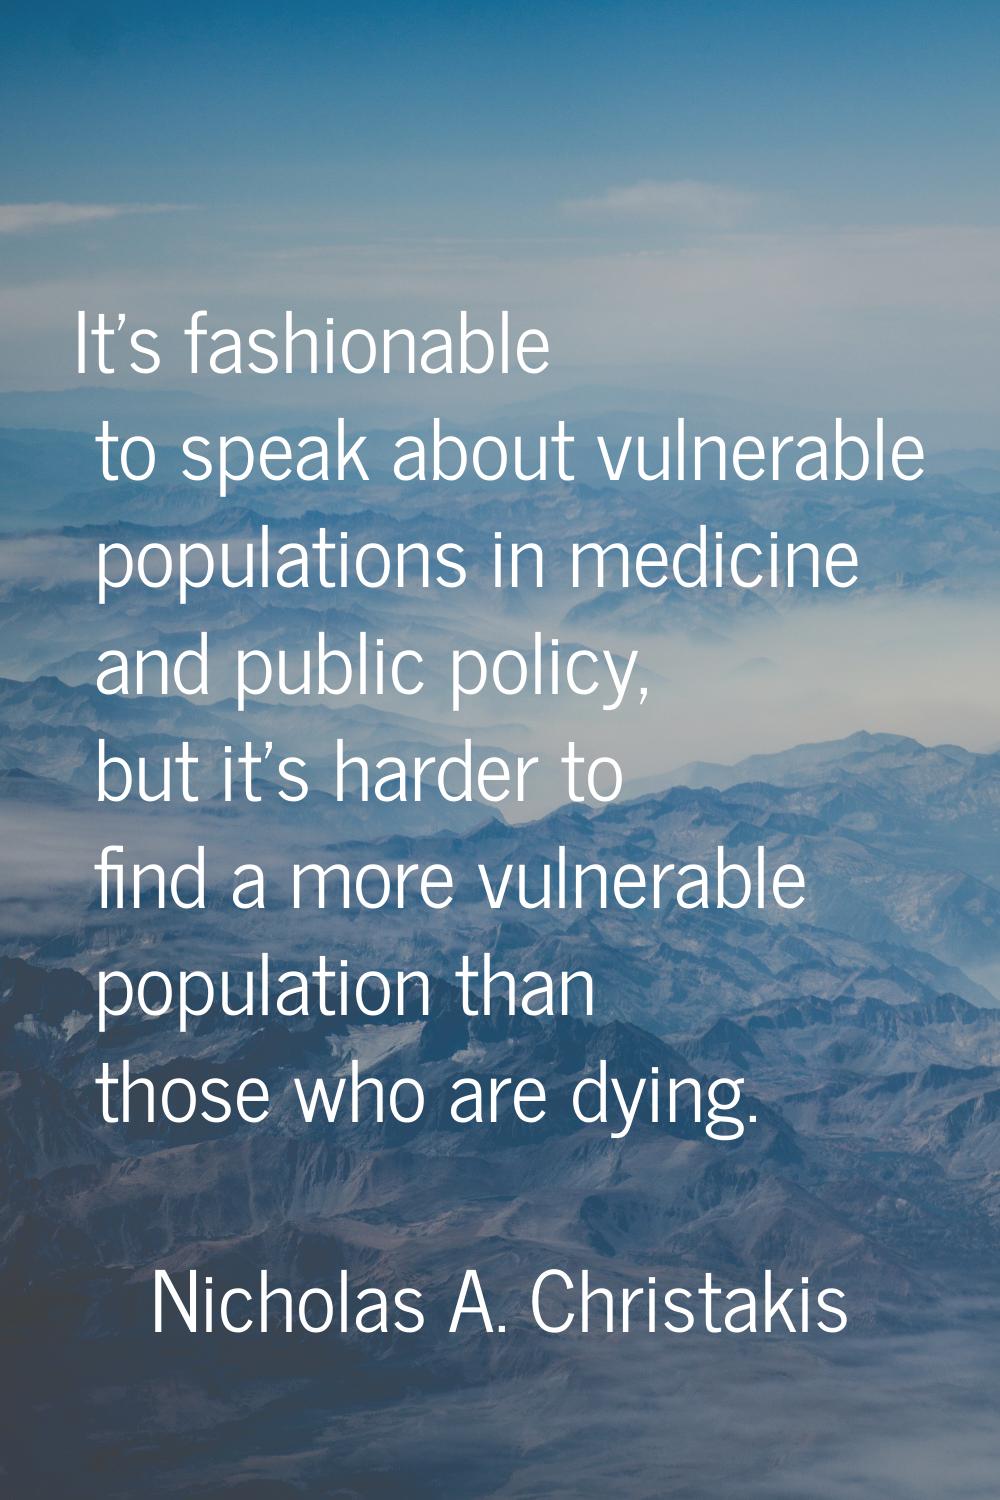 It's fashionable to speak about vulnerable populations in medicine and public policy, but it's hard